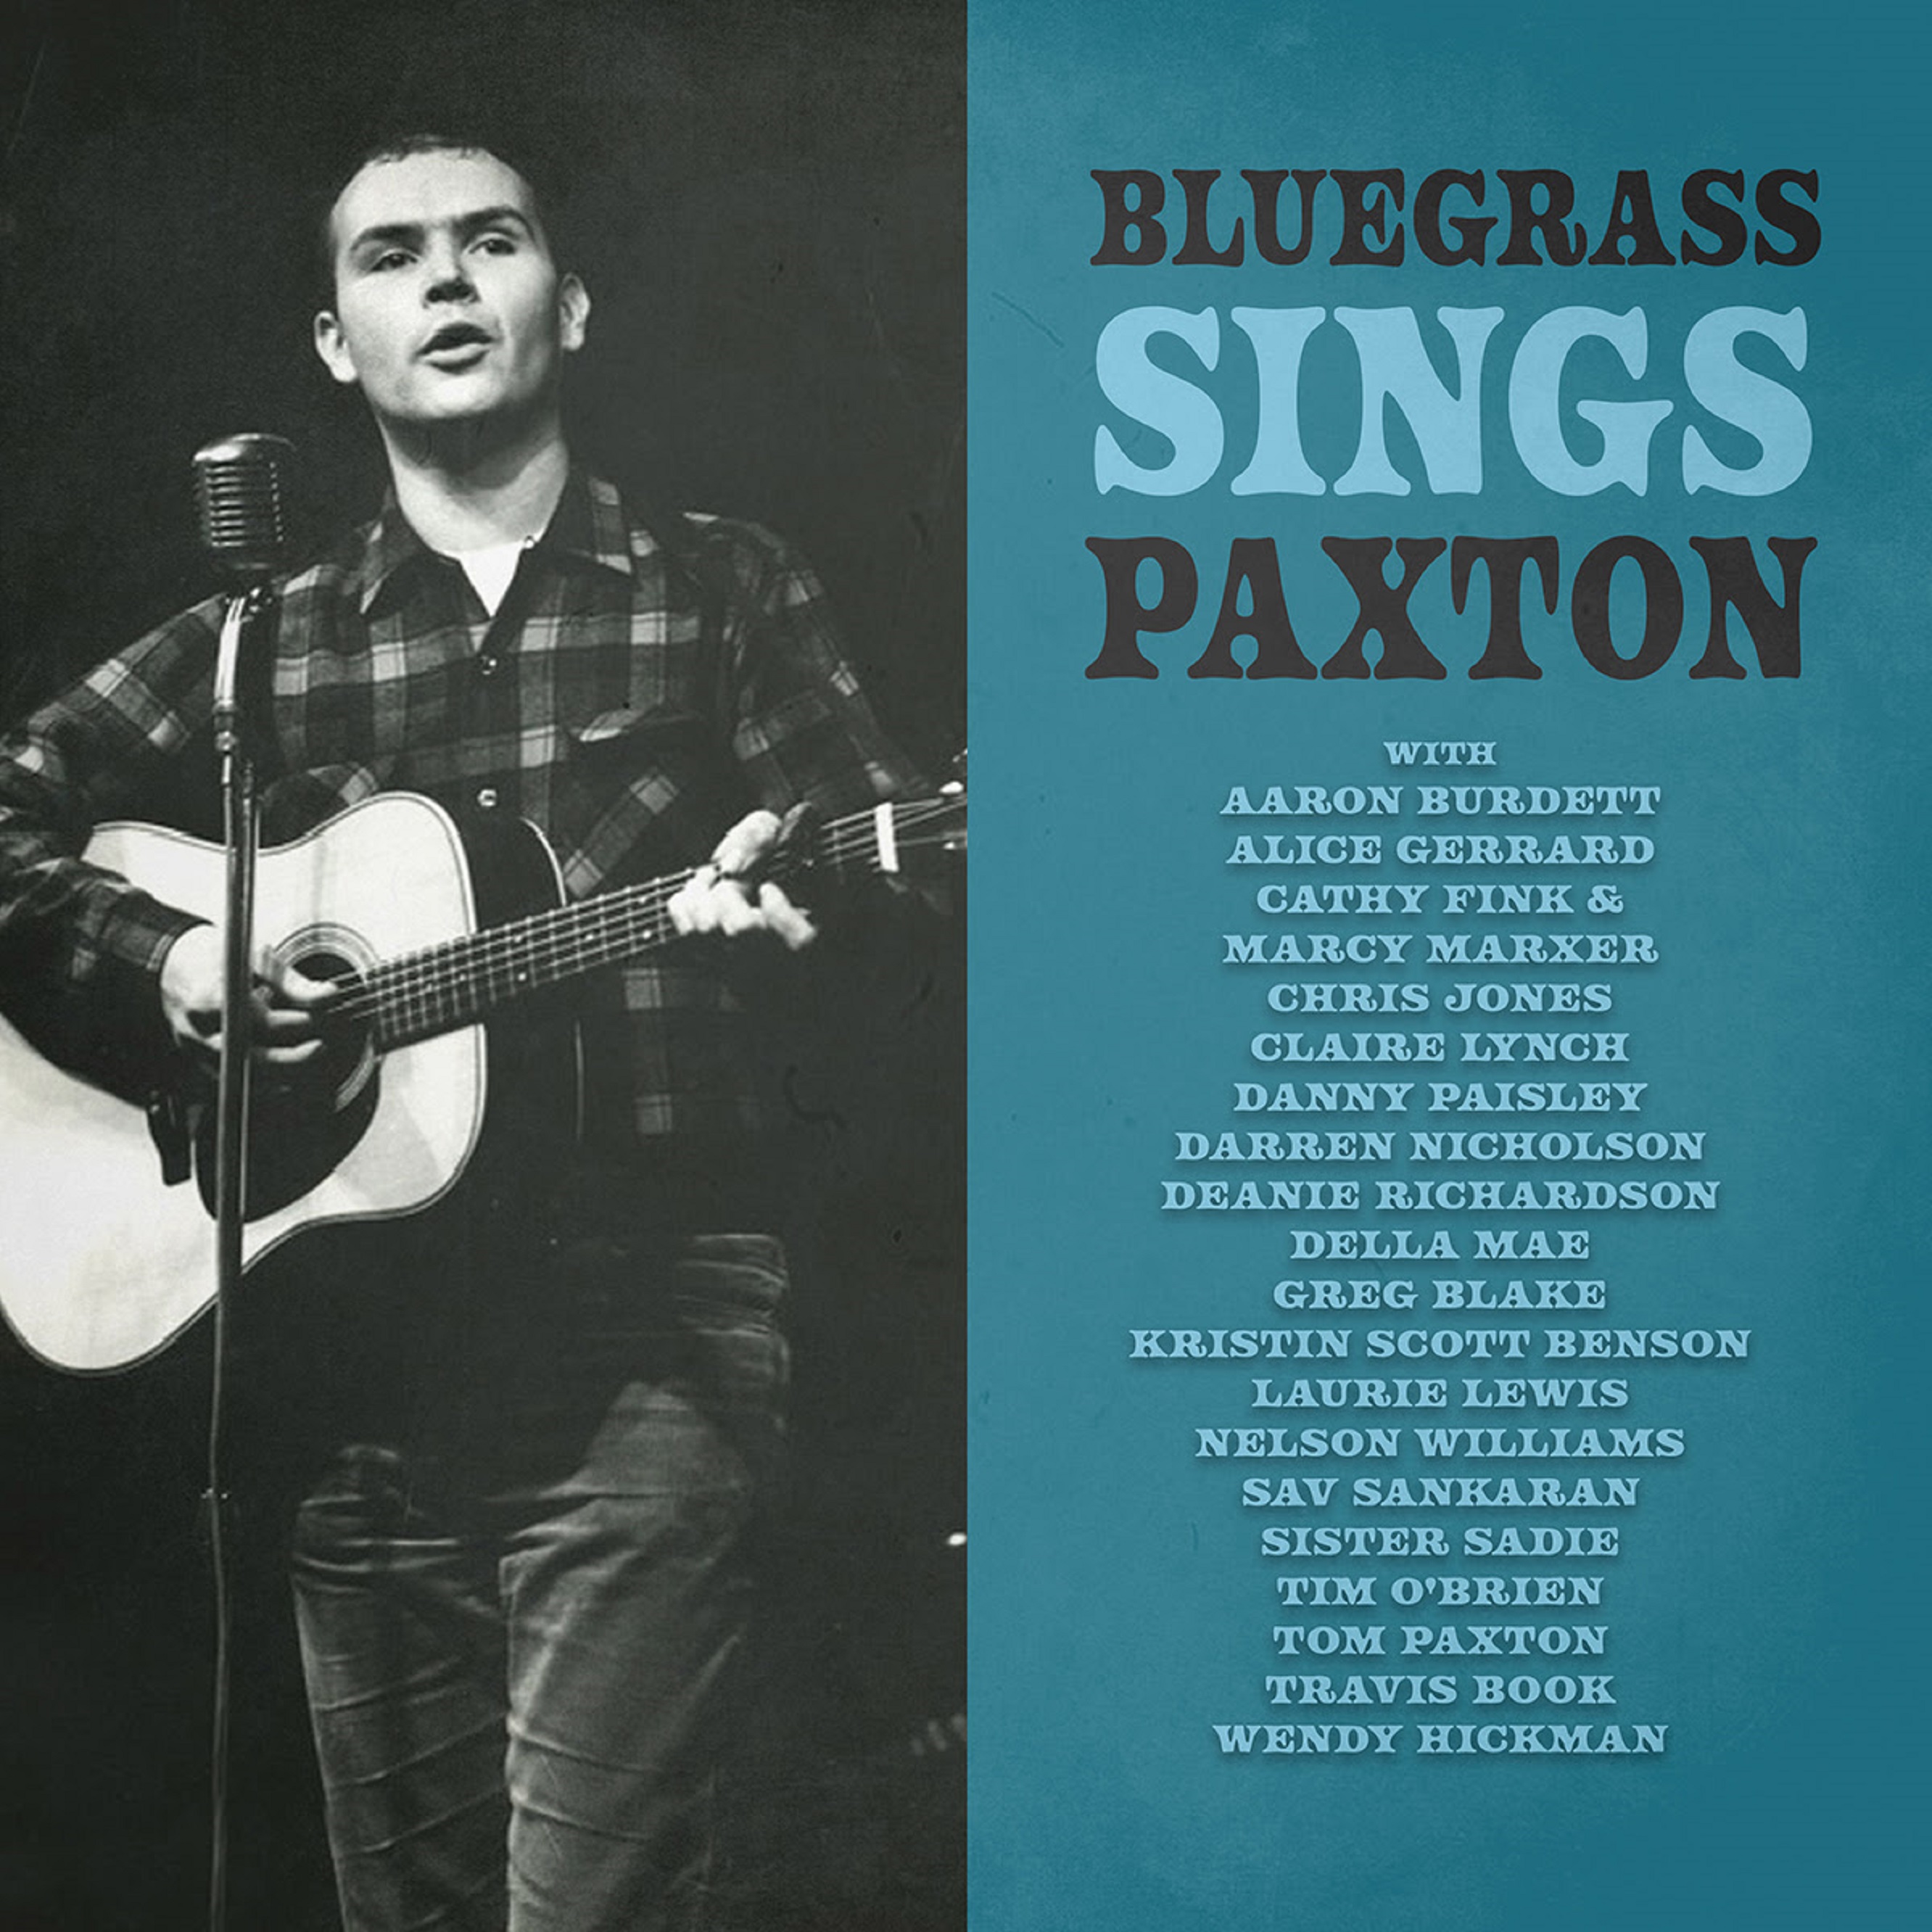 Bluegrass Sings Paxton is a sparkling, genre-wide salute to an acclaimed songwriter